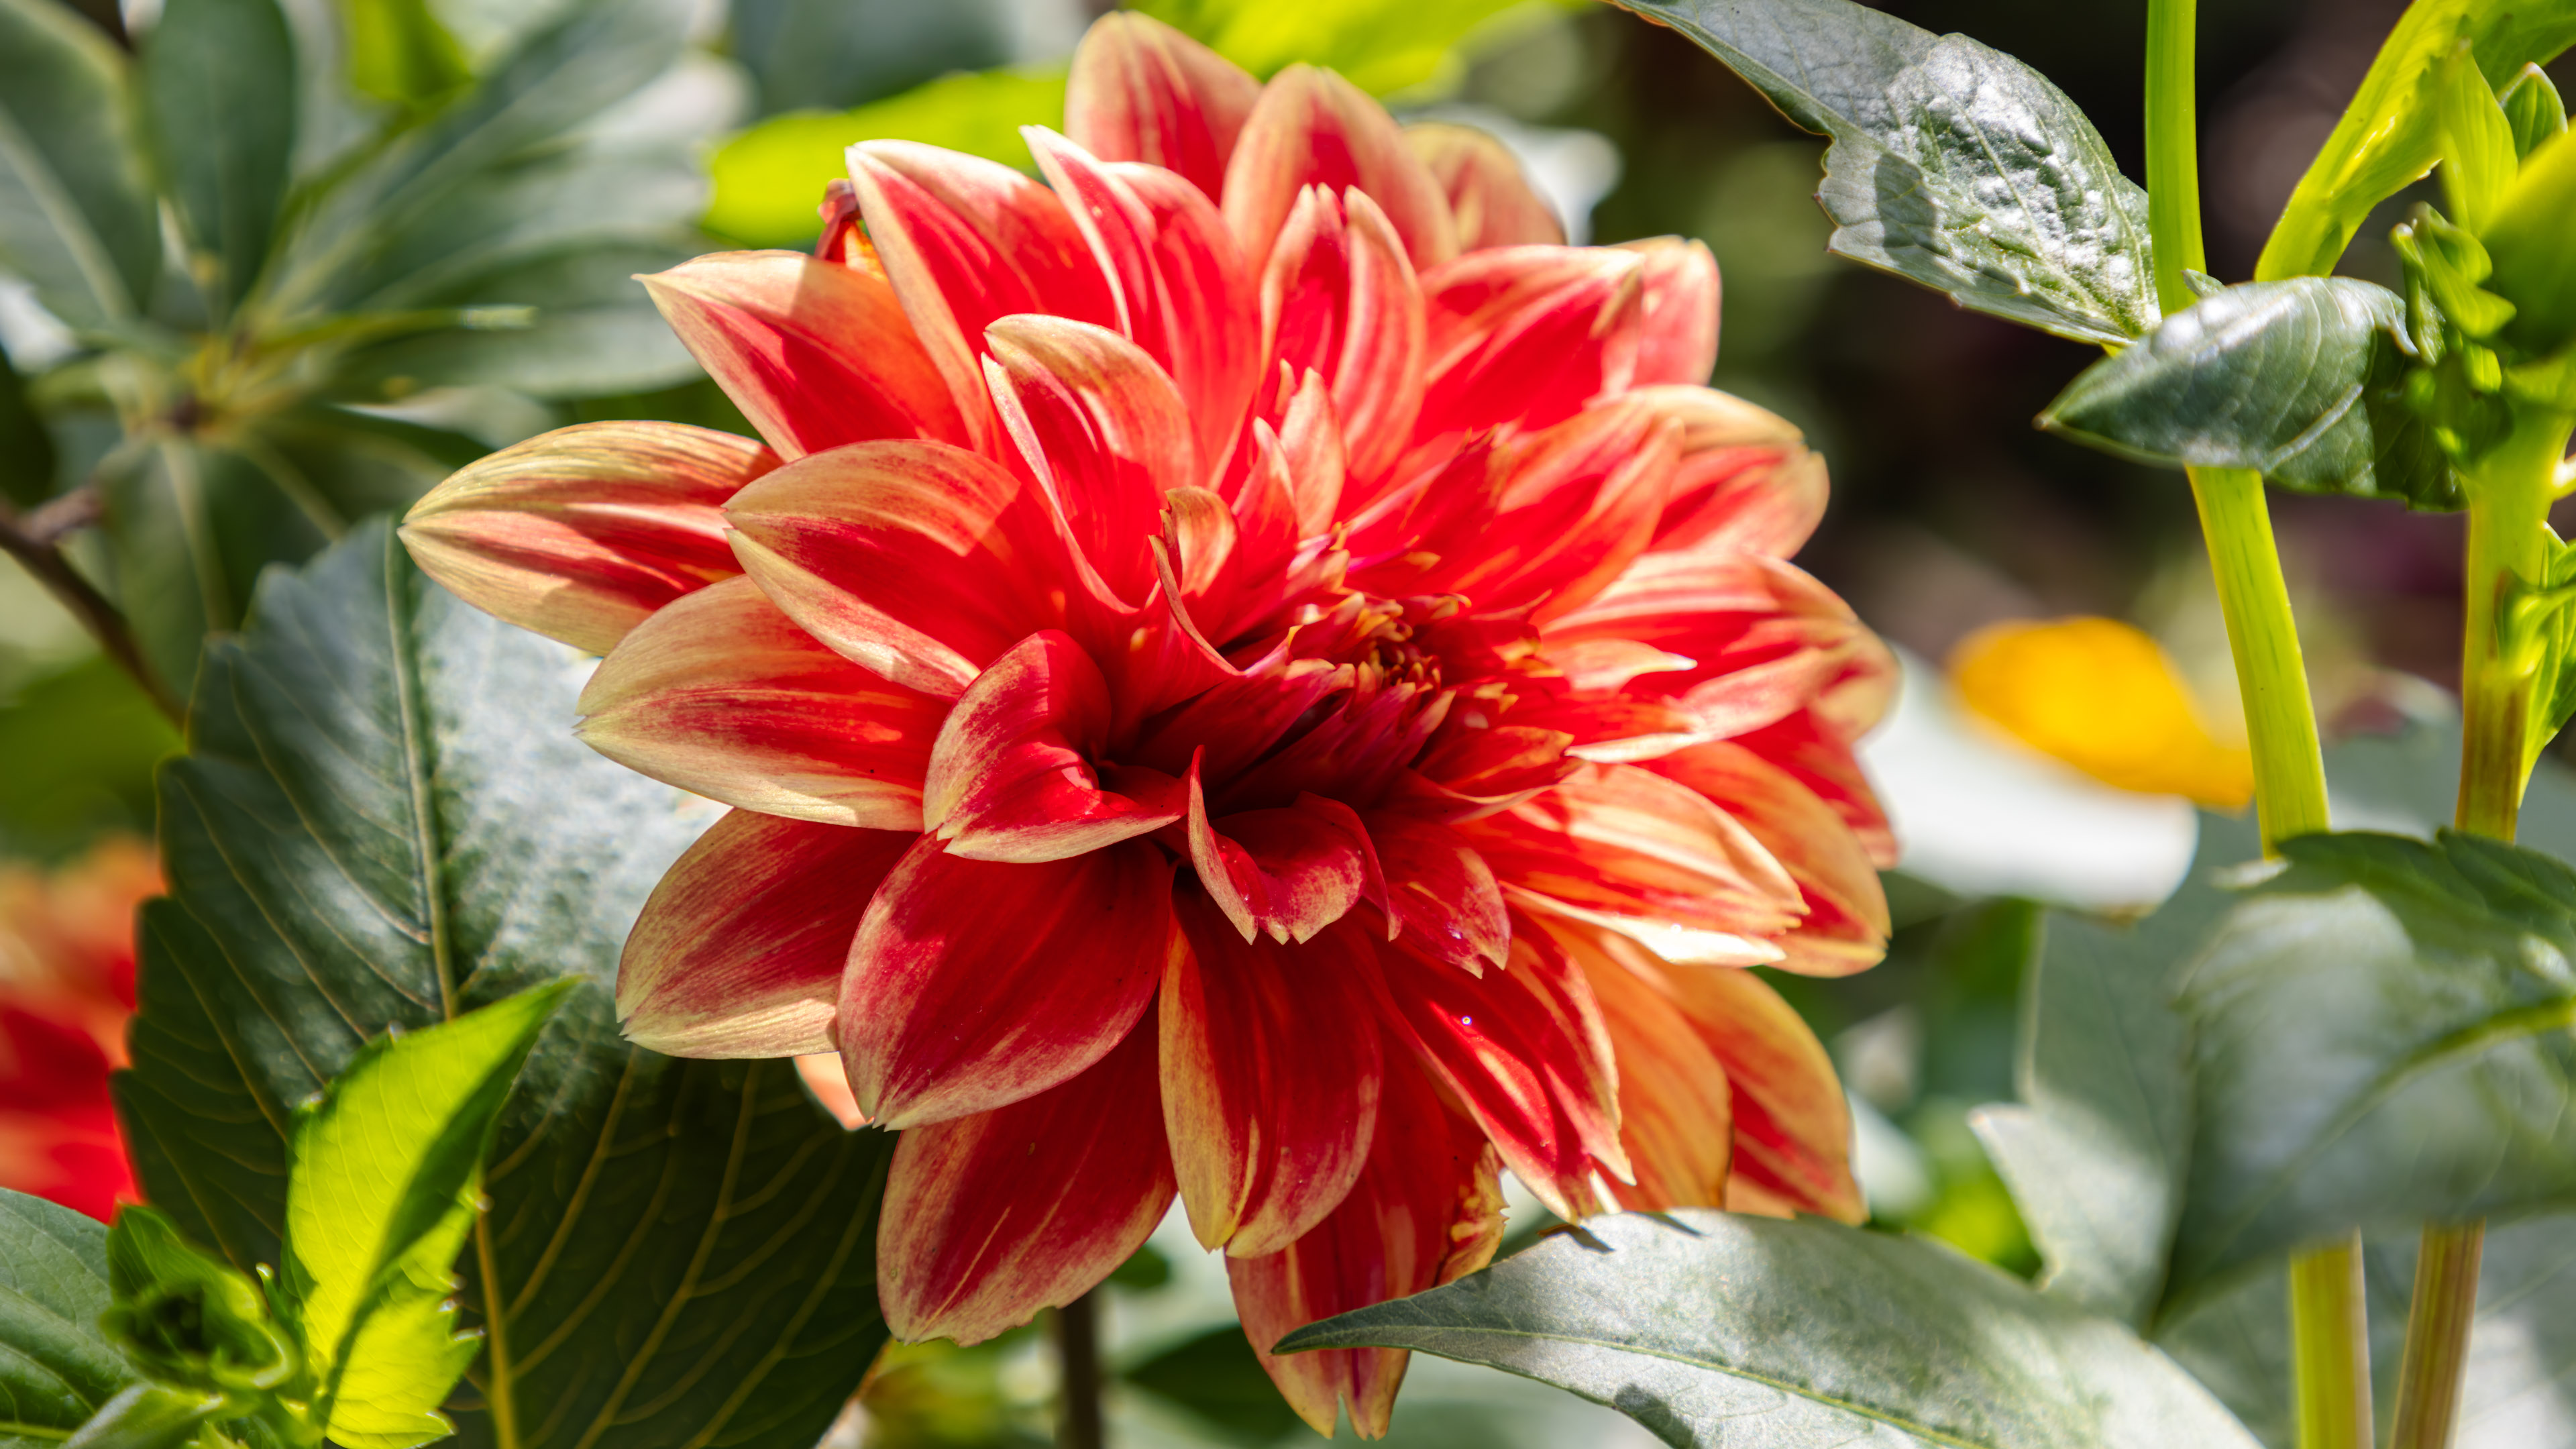 Experience the vibrancy of nature on your desktop with our 4K red and yellow flower wallpaper.